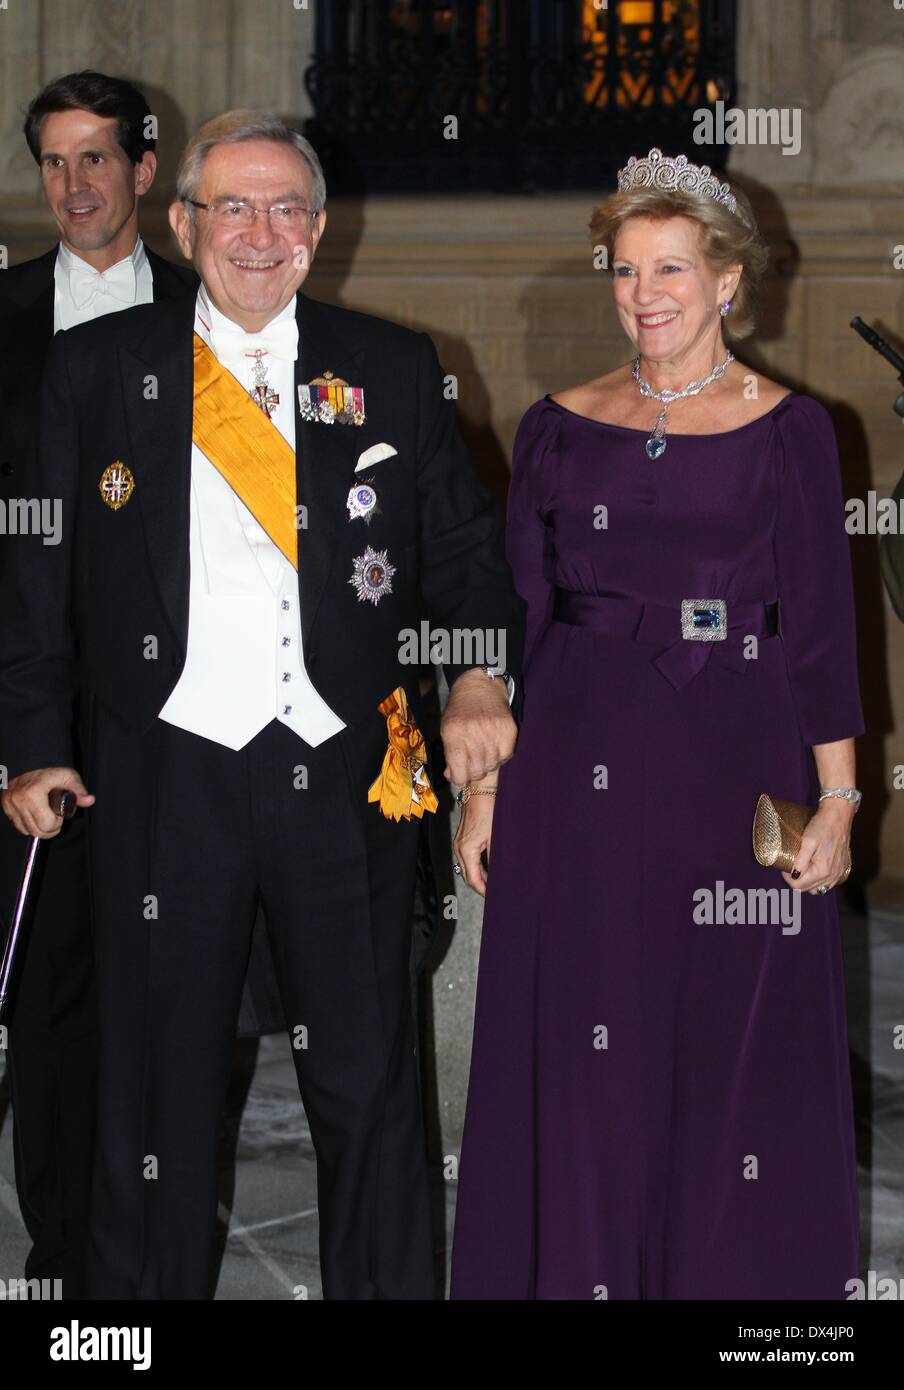 King Constantine of Greece and Queen Anne Marie of Greece attends the gala dinner at the wedding of Hereditary Grand Duke Guillaume of Luxembourg and his bride, Countess Stephanie de Lannoy Luxembourg City, Luxembourg - 19.10.12 Where: LUXEMBOURG When: 19 Oct 2012 **or Publication in Germany** Stock Photo